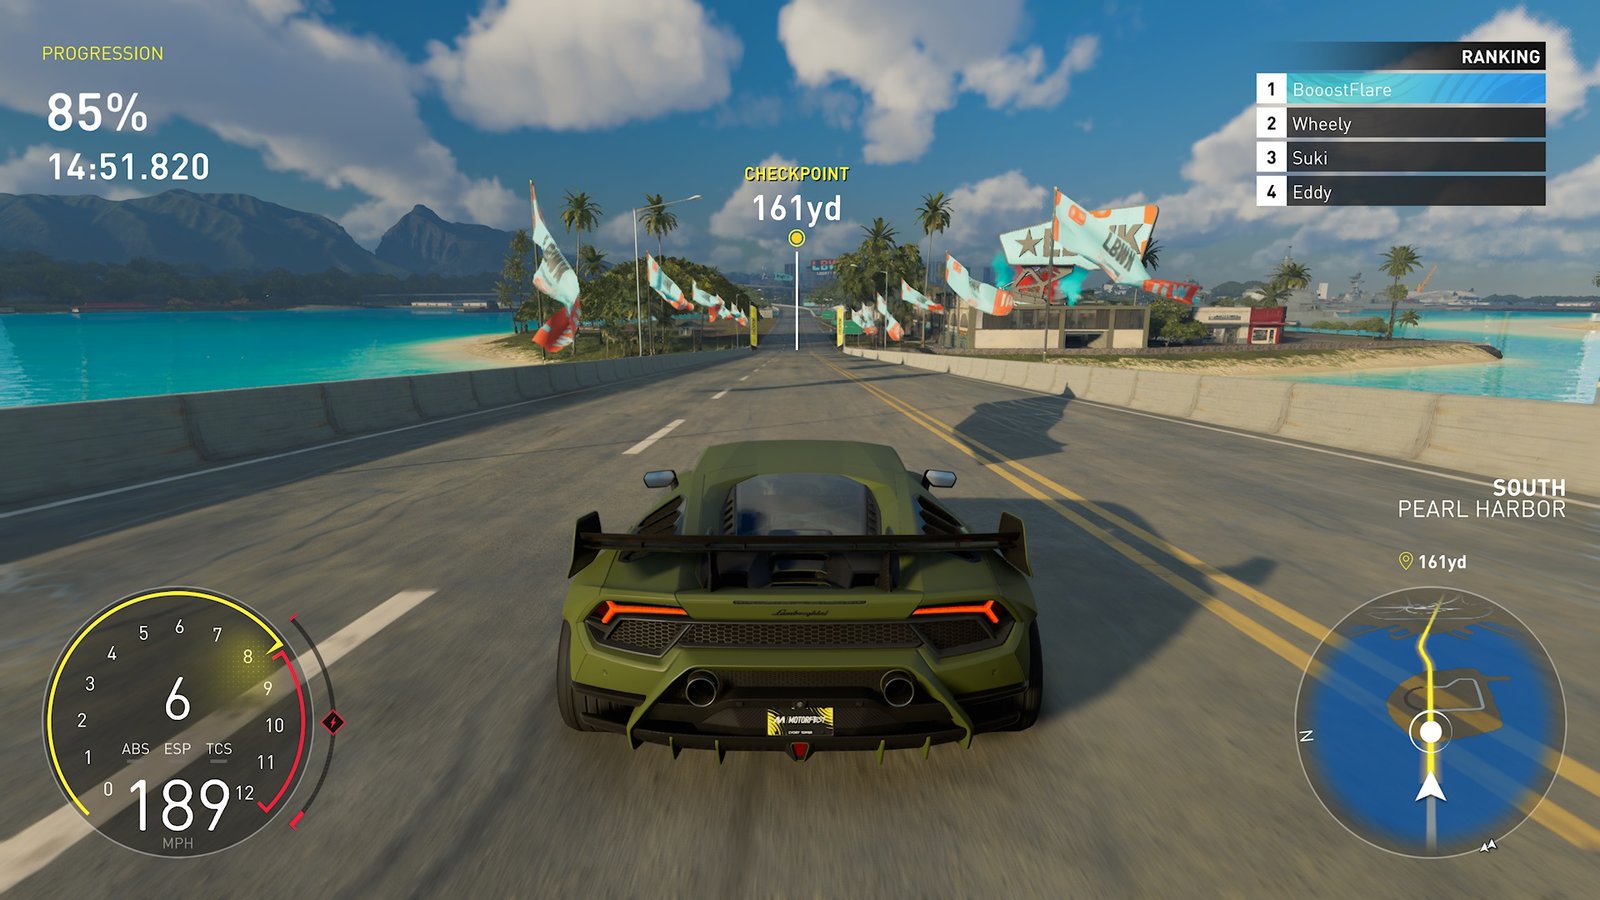 You can add The Crew: Motorfest to your wishlist on PS5. Also states that  32 player lobbies are supported : r/thecrew2